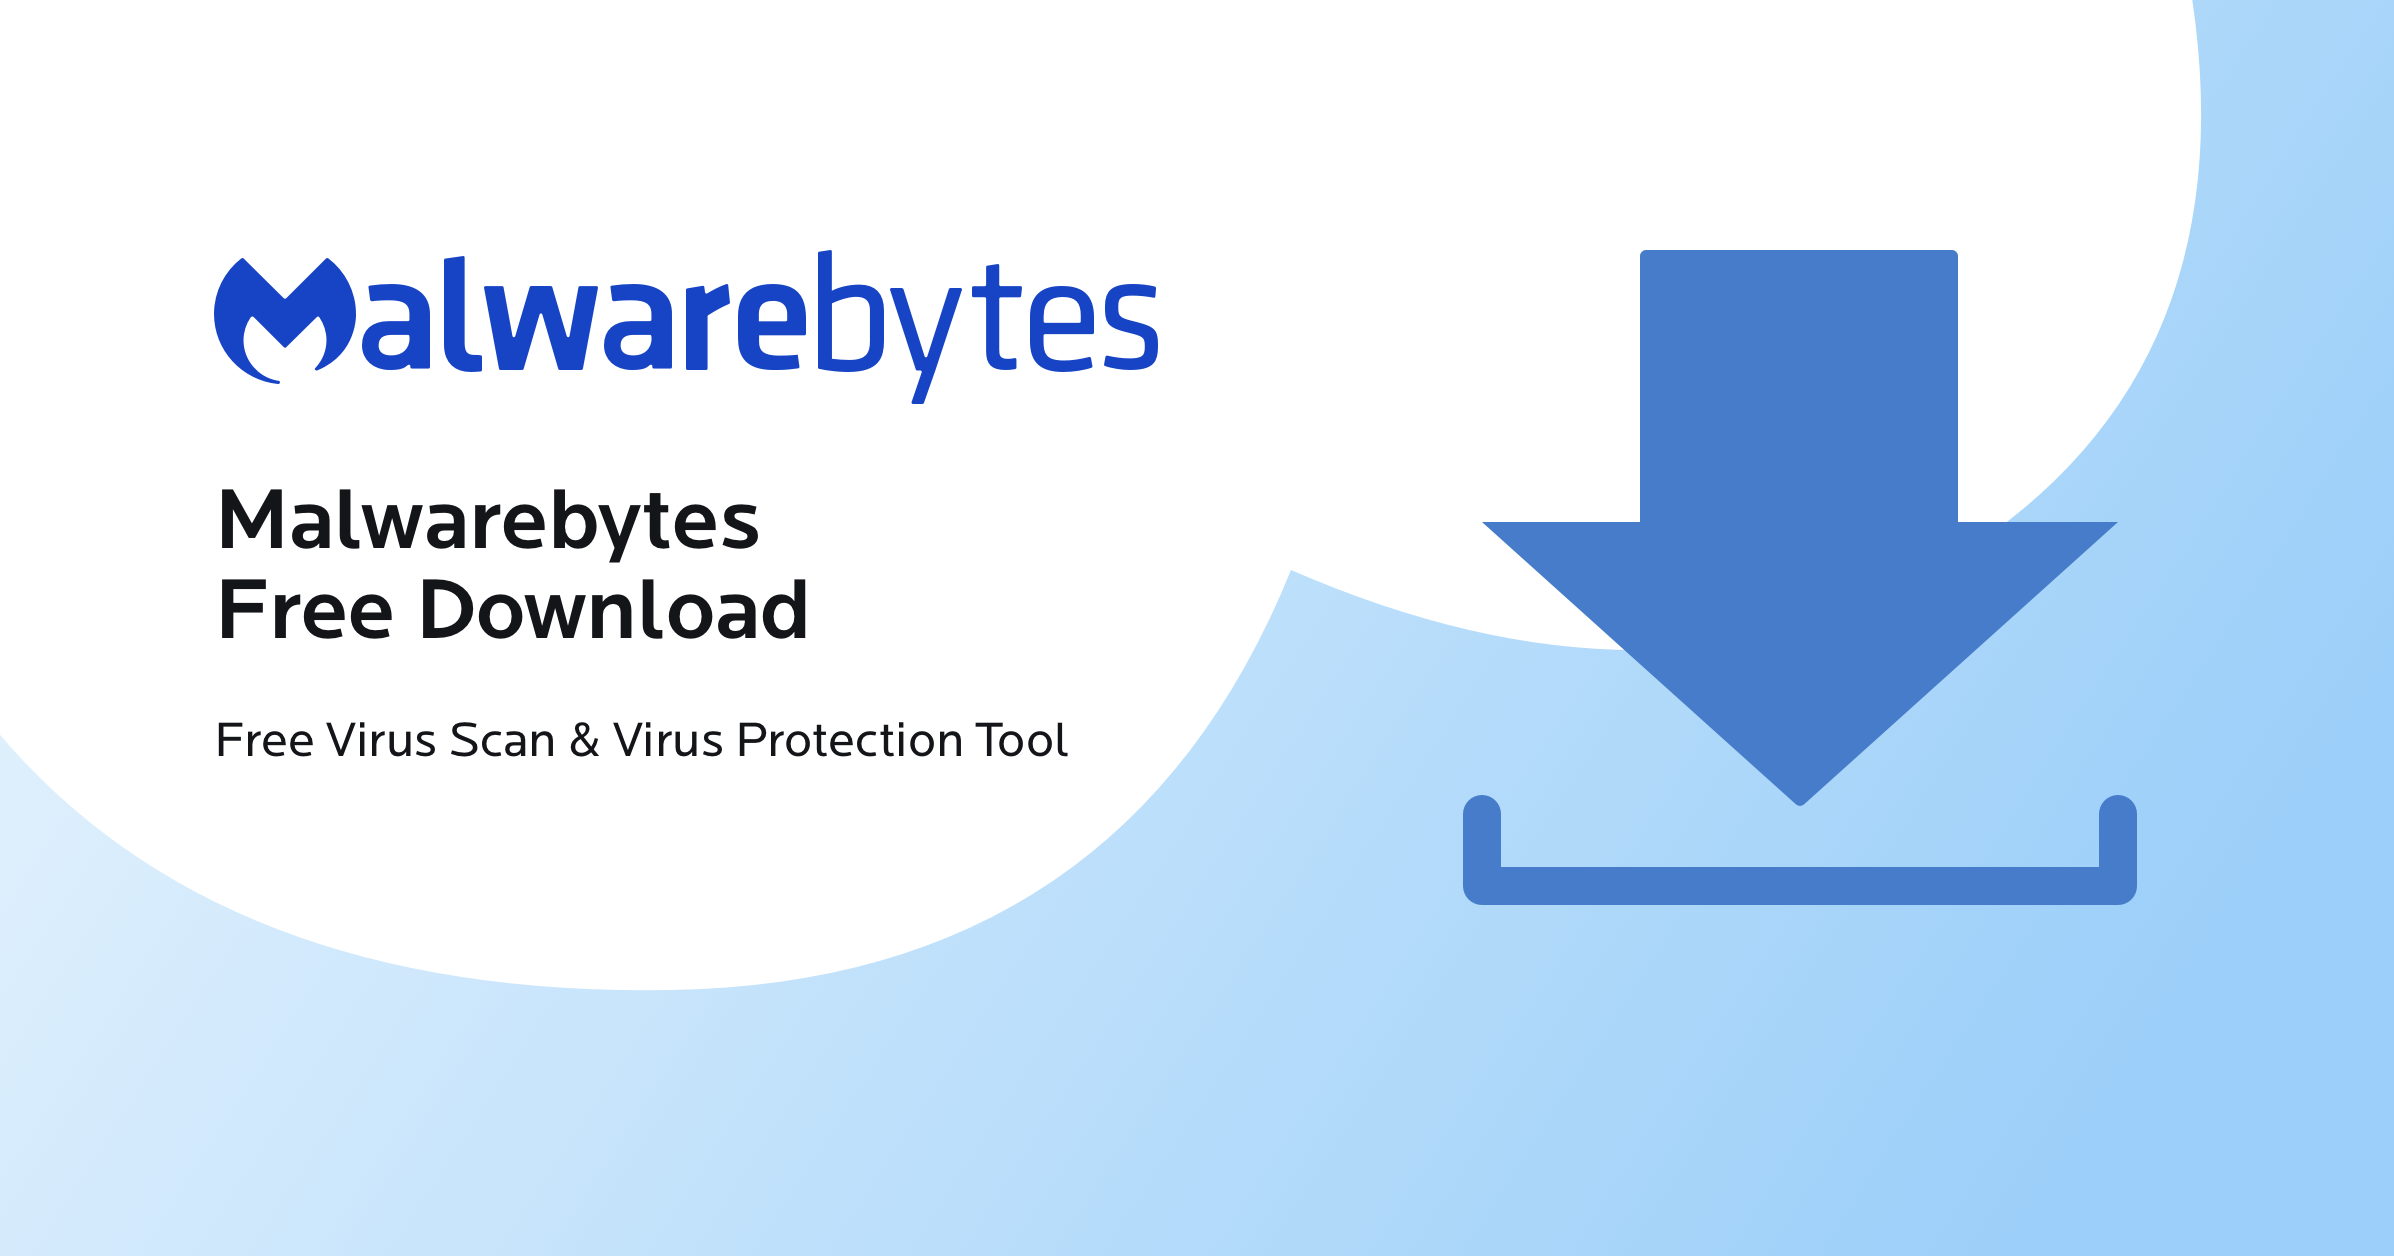 Download a reputable anti-malware software such as Malwarebytes.
Install the software and open it.